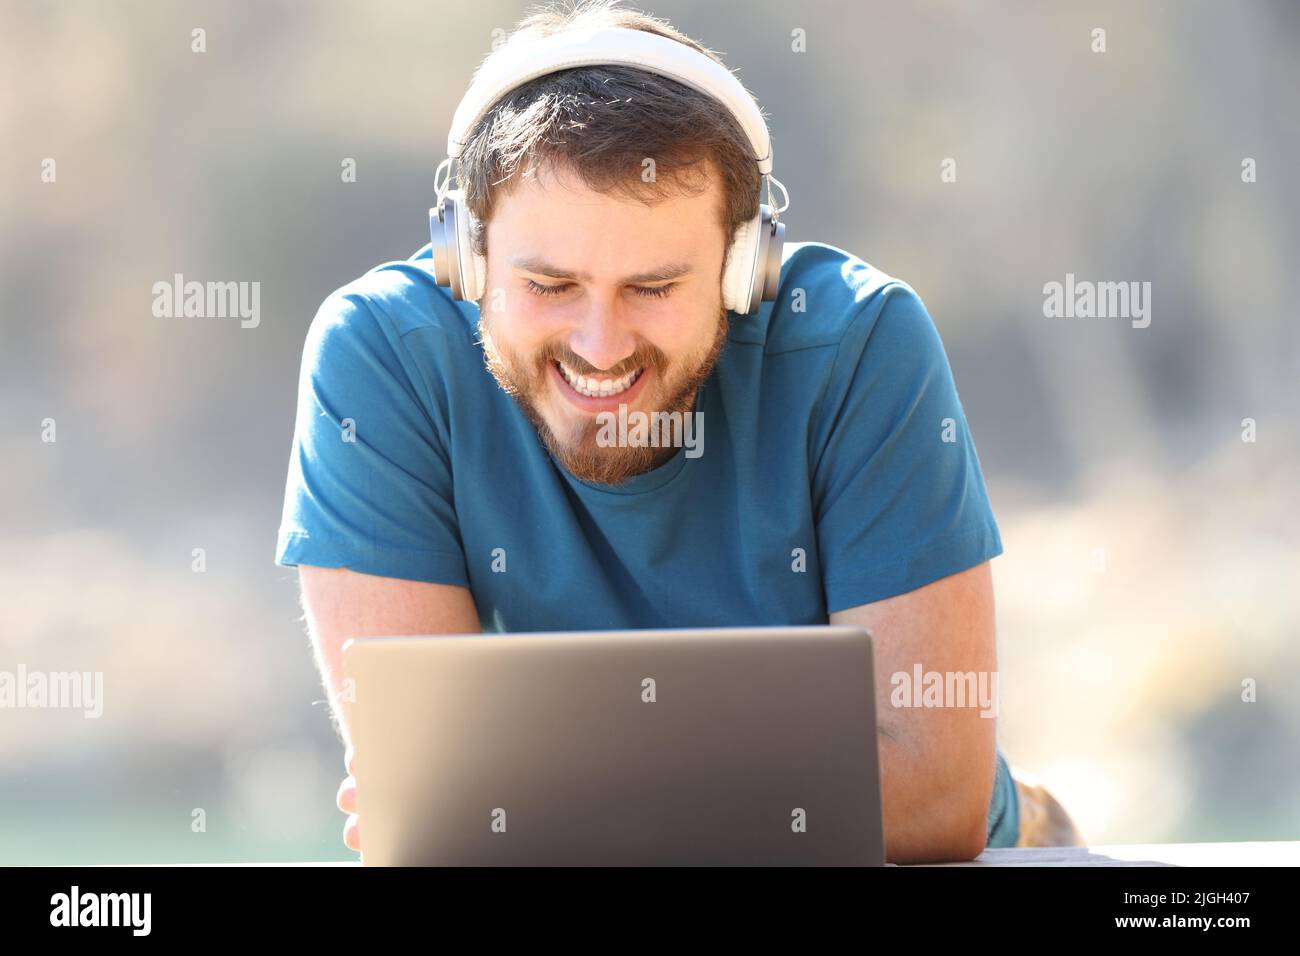 Front view of a happy man watching videos on laptop wearing headphones outdoors Stock Photo